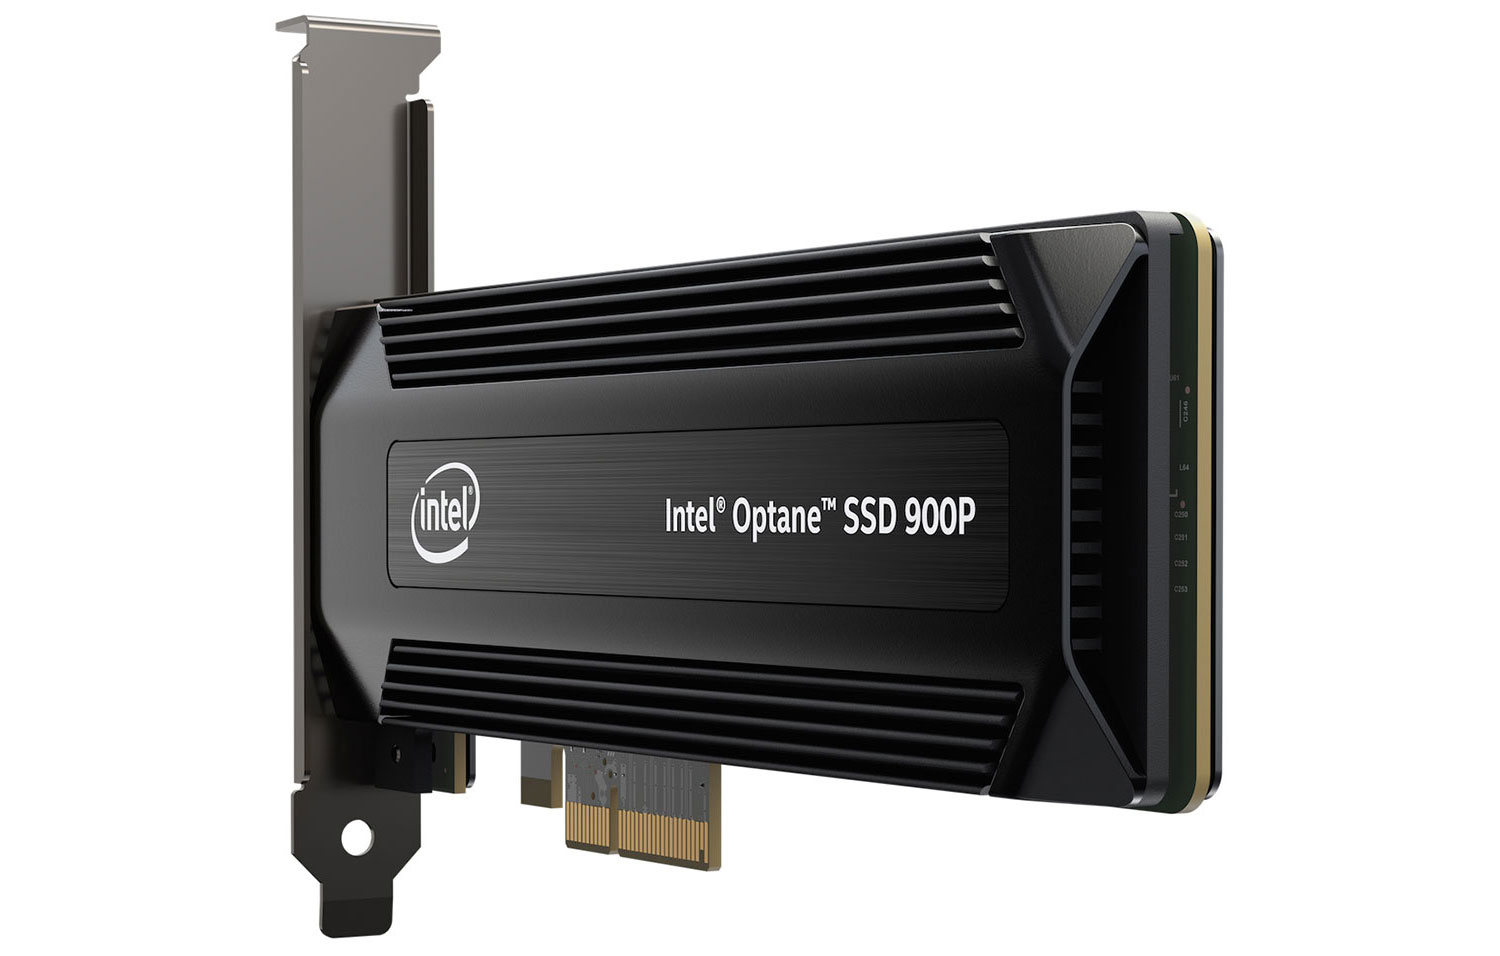 Intel is tripling the capacity of its awesome Optane SSD 900P to 1.5TB